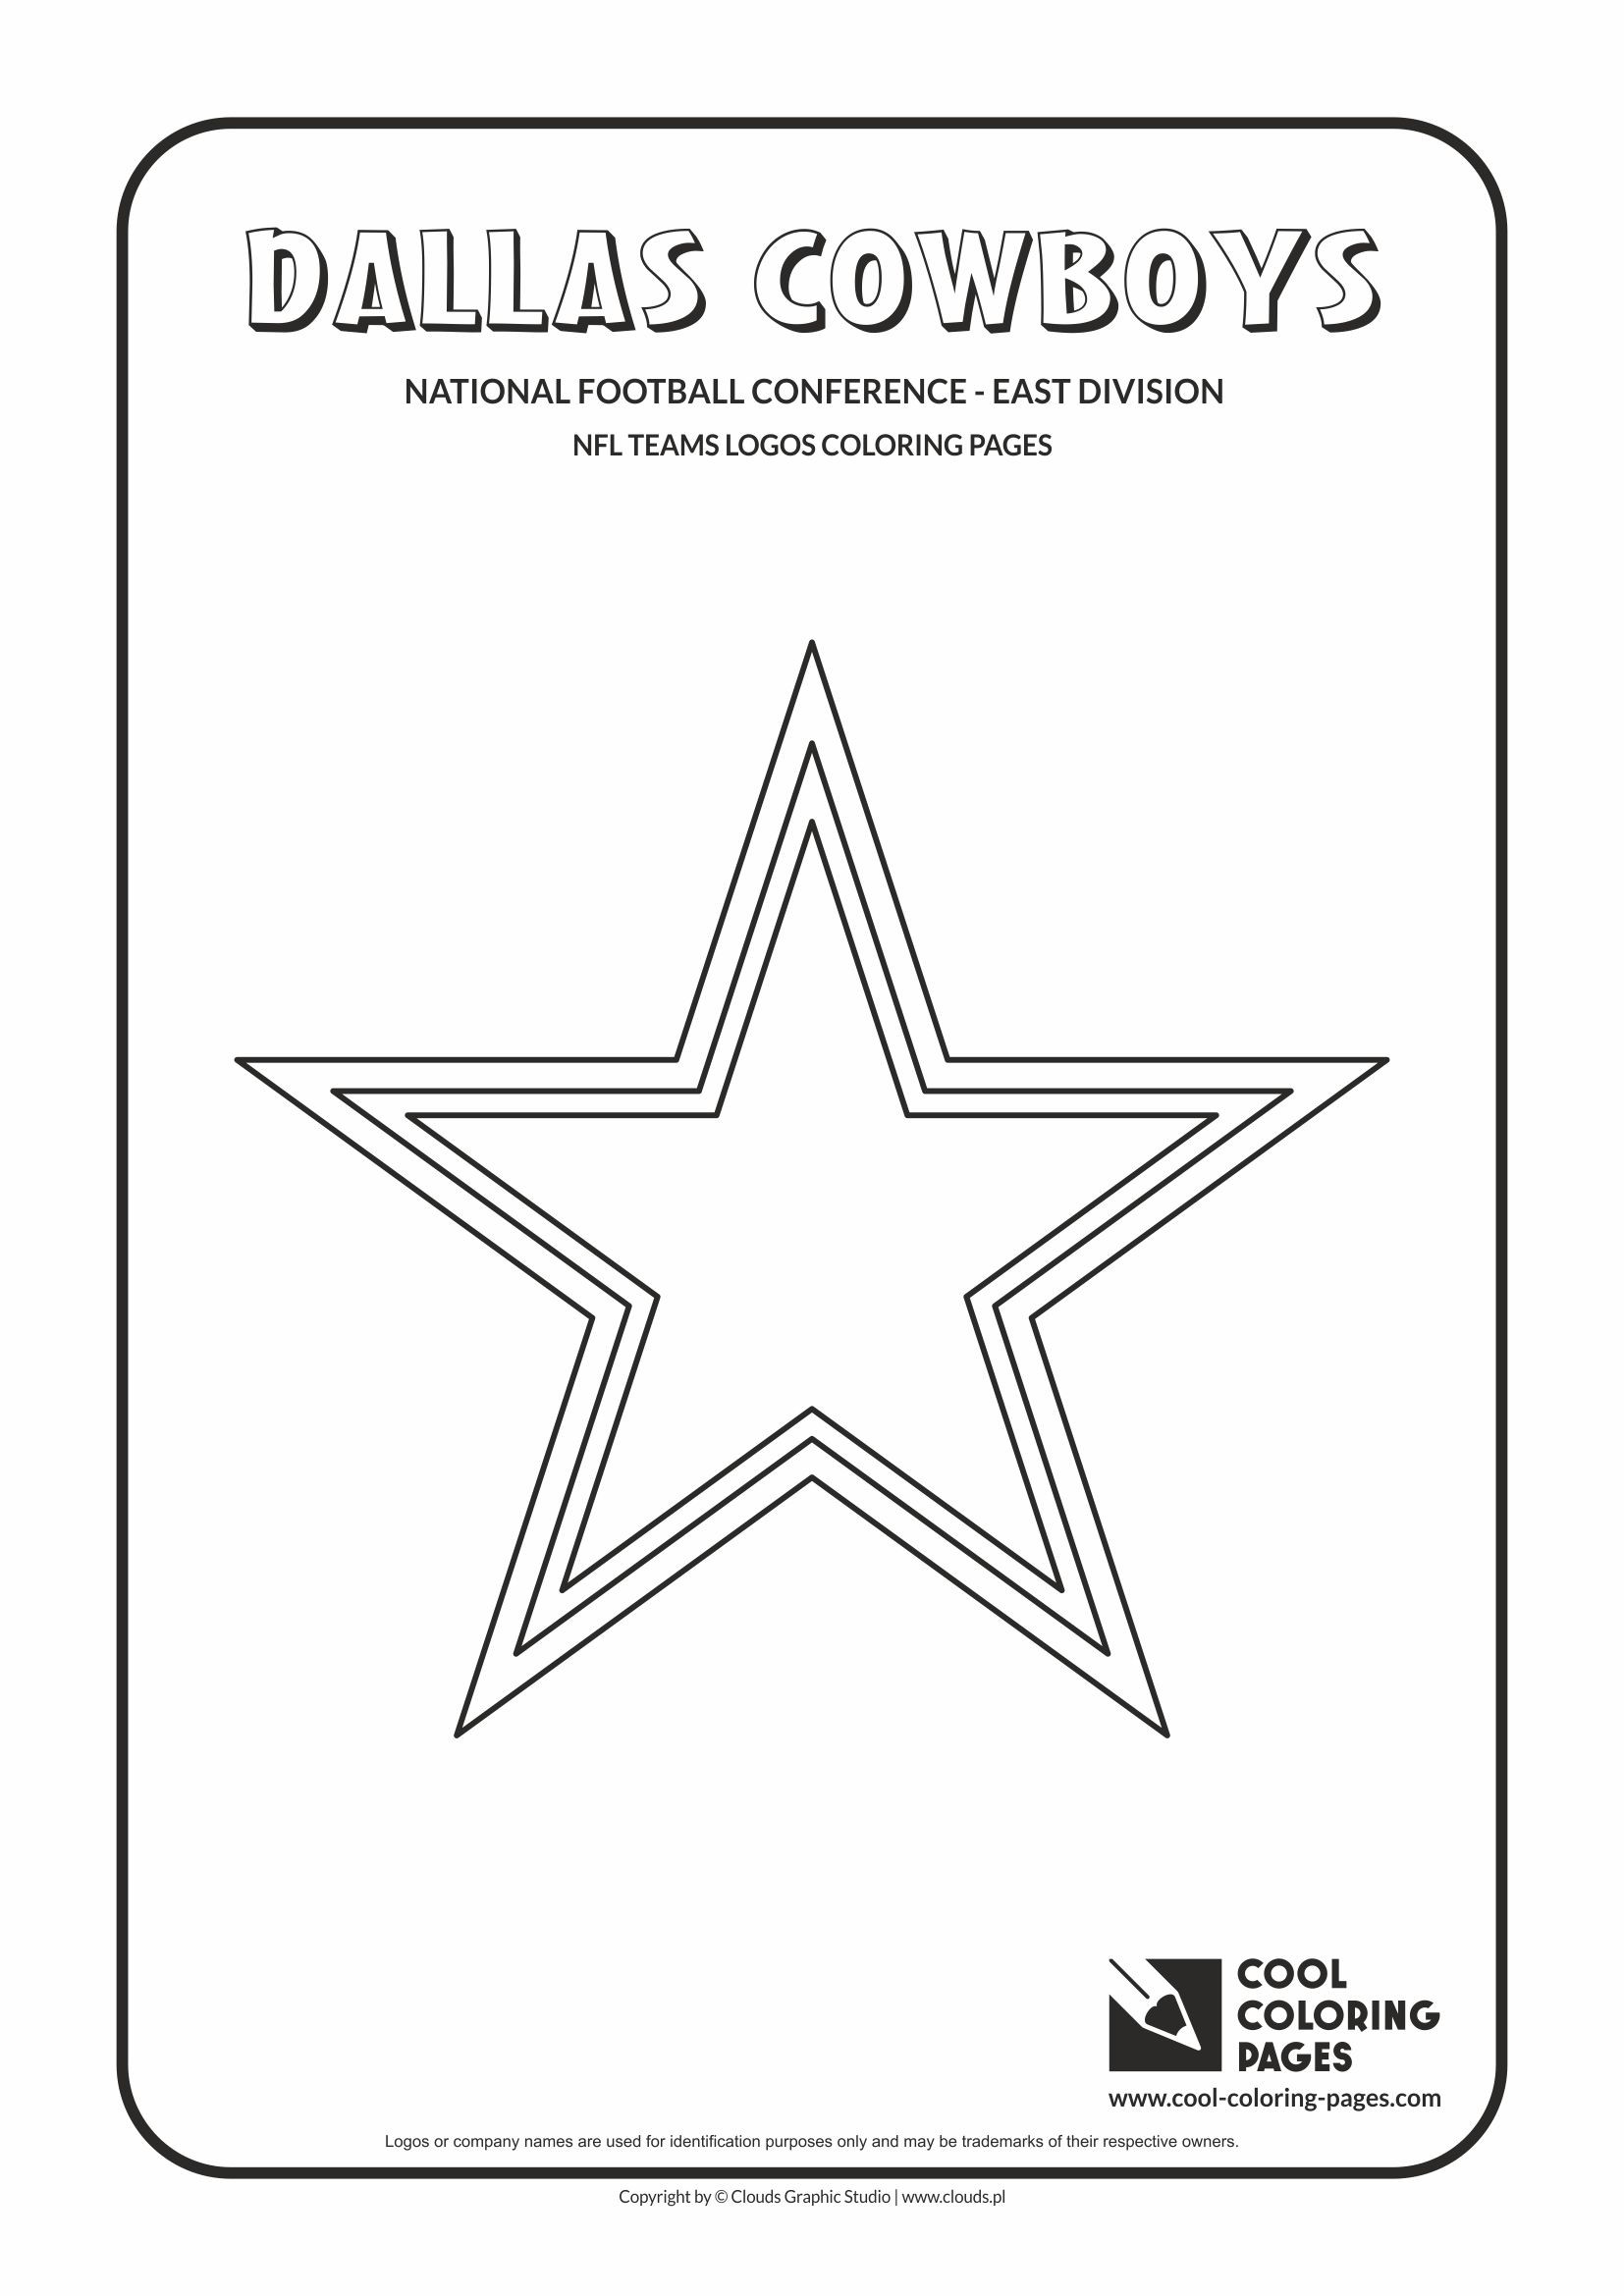 Free Dallas Cowboys Coloring Pages
 Cool Coloring Pages NFL teams logos coloring pages Cool